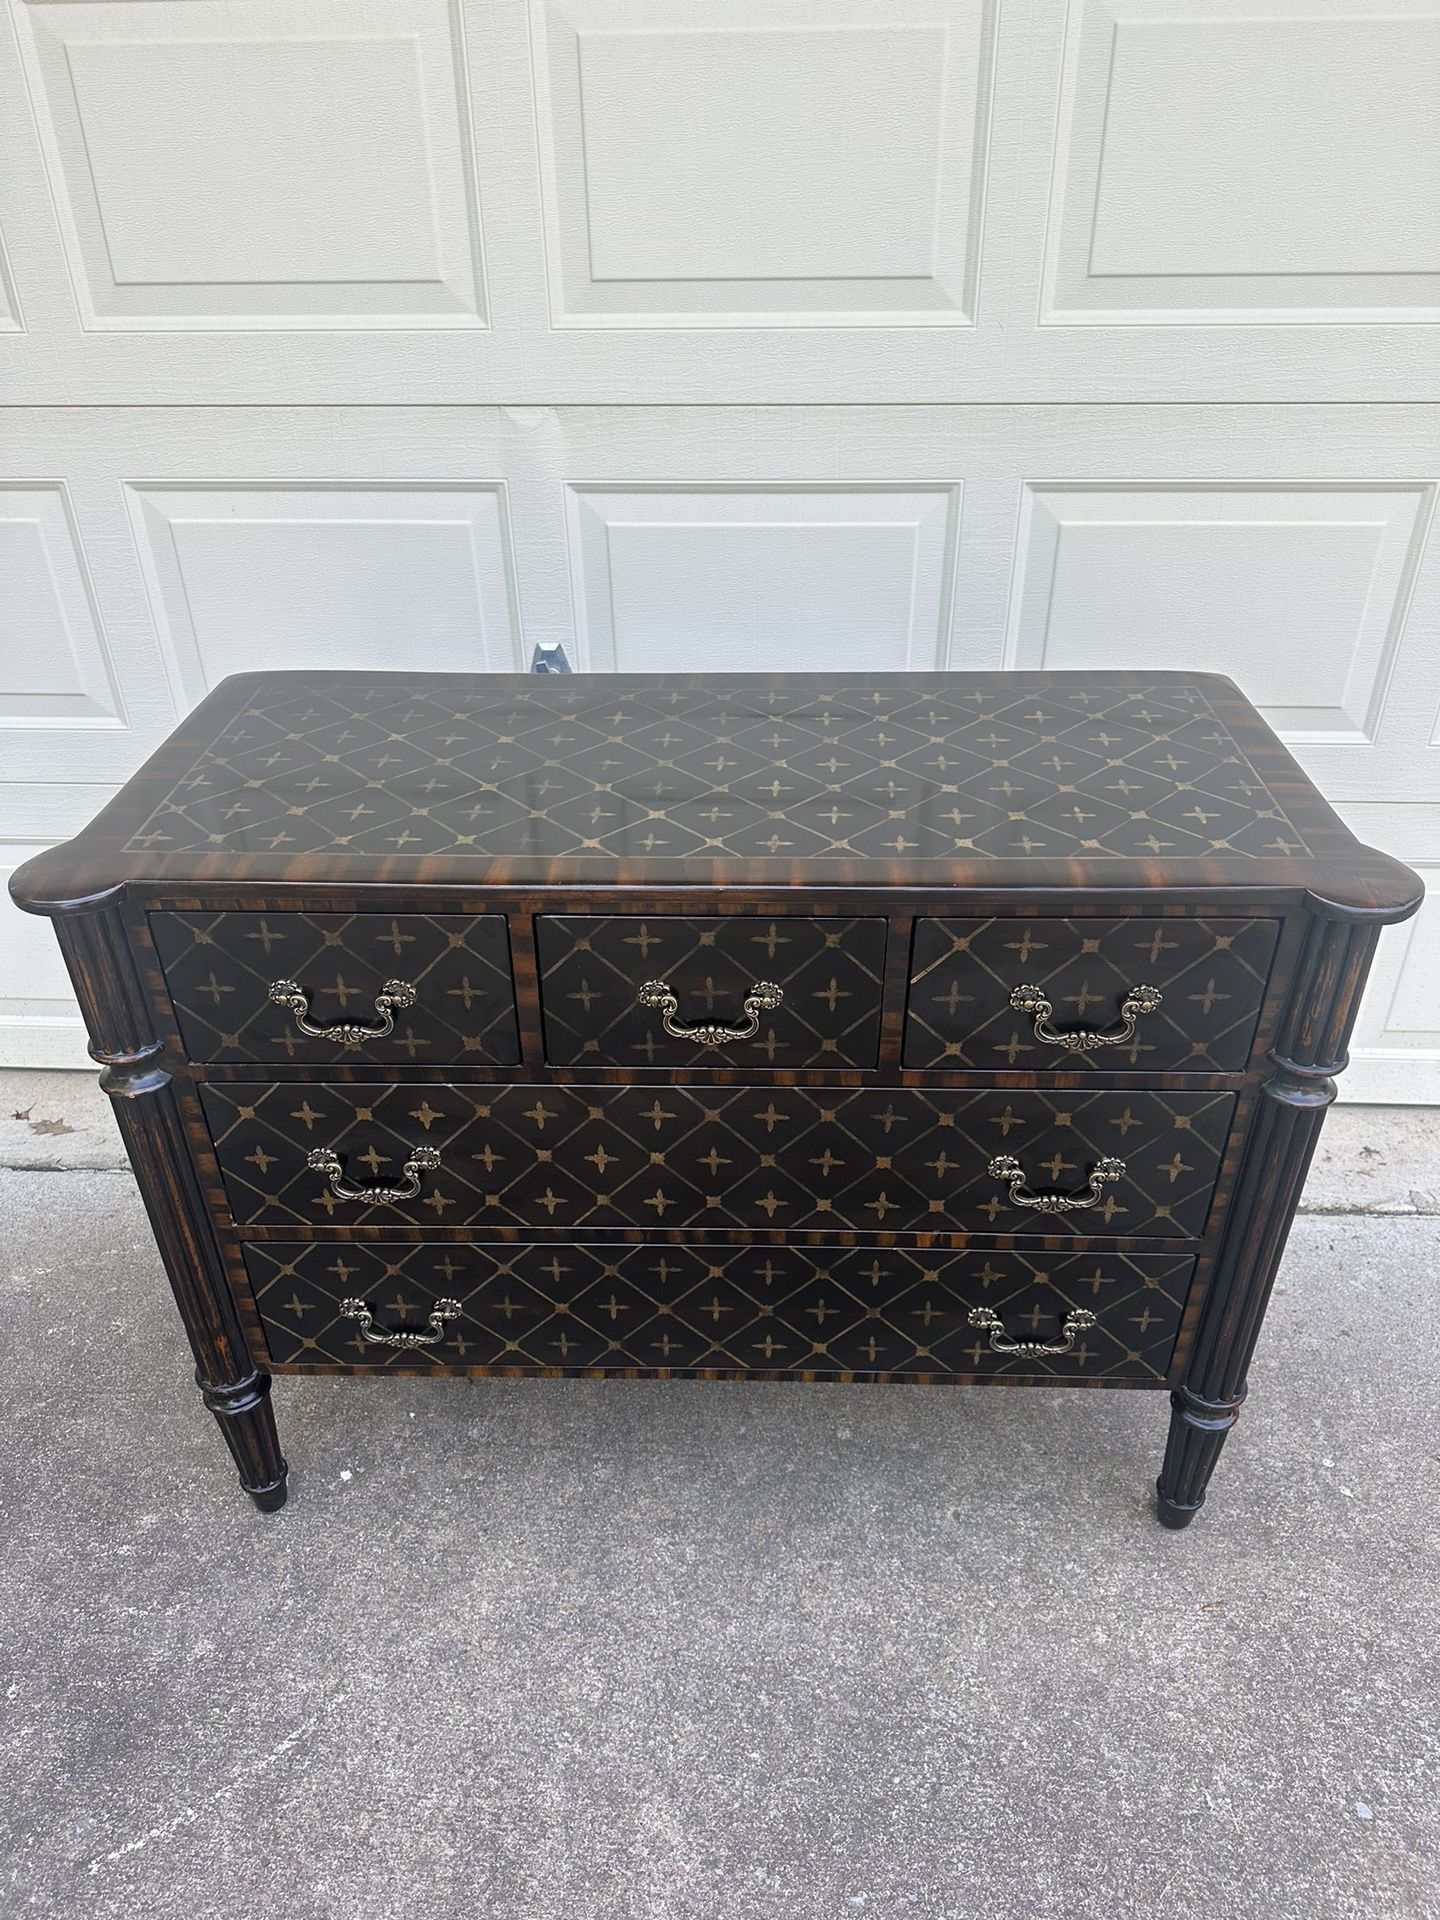 CUSTOM MADE SOLID WOOD BLACK & GOLD LACQUER - “LOUIS VUITTON” STYLE CHEST - EXCELLENT CONDITION!